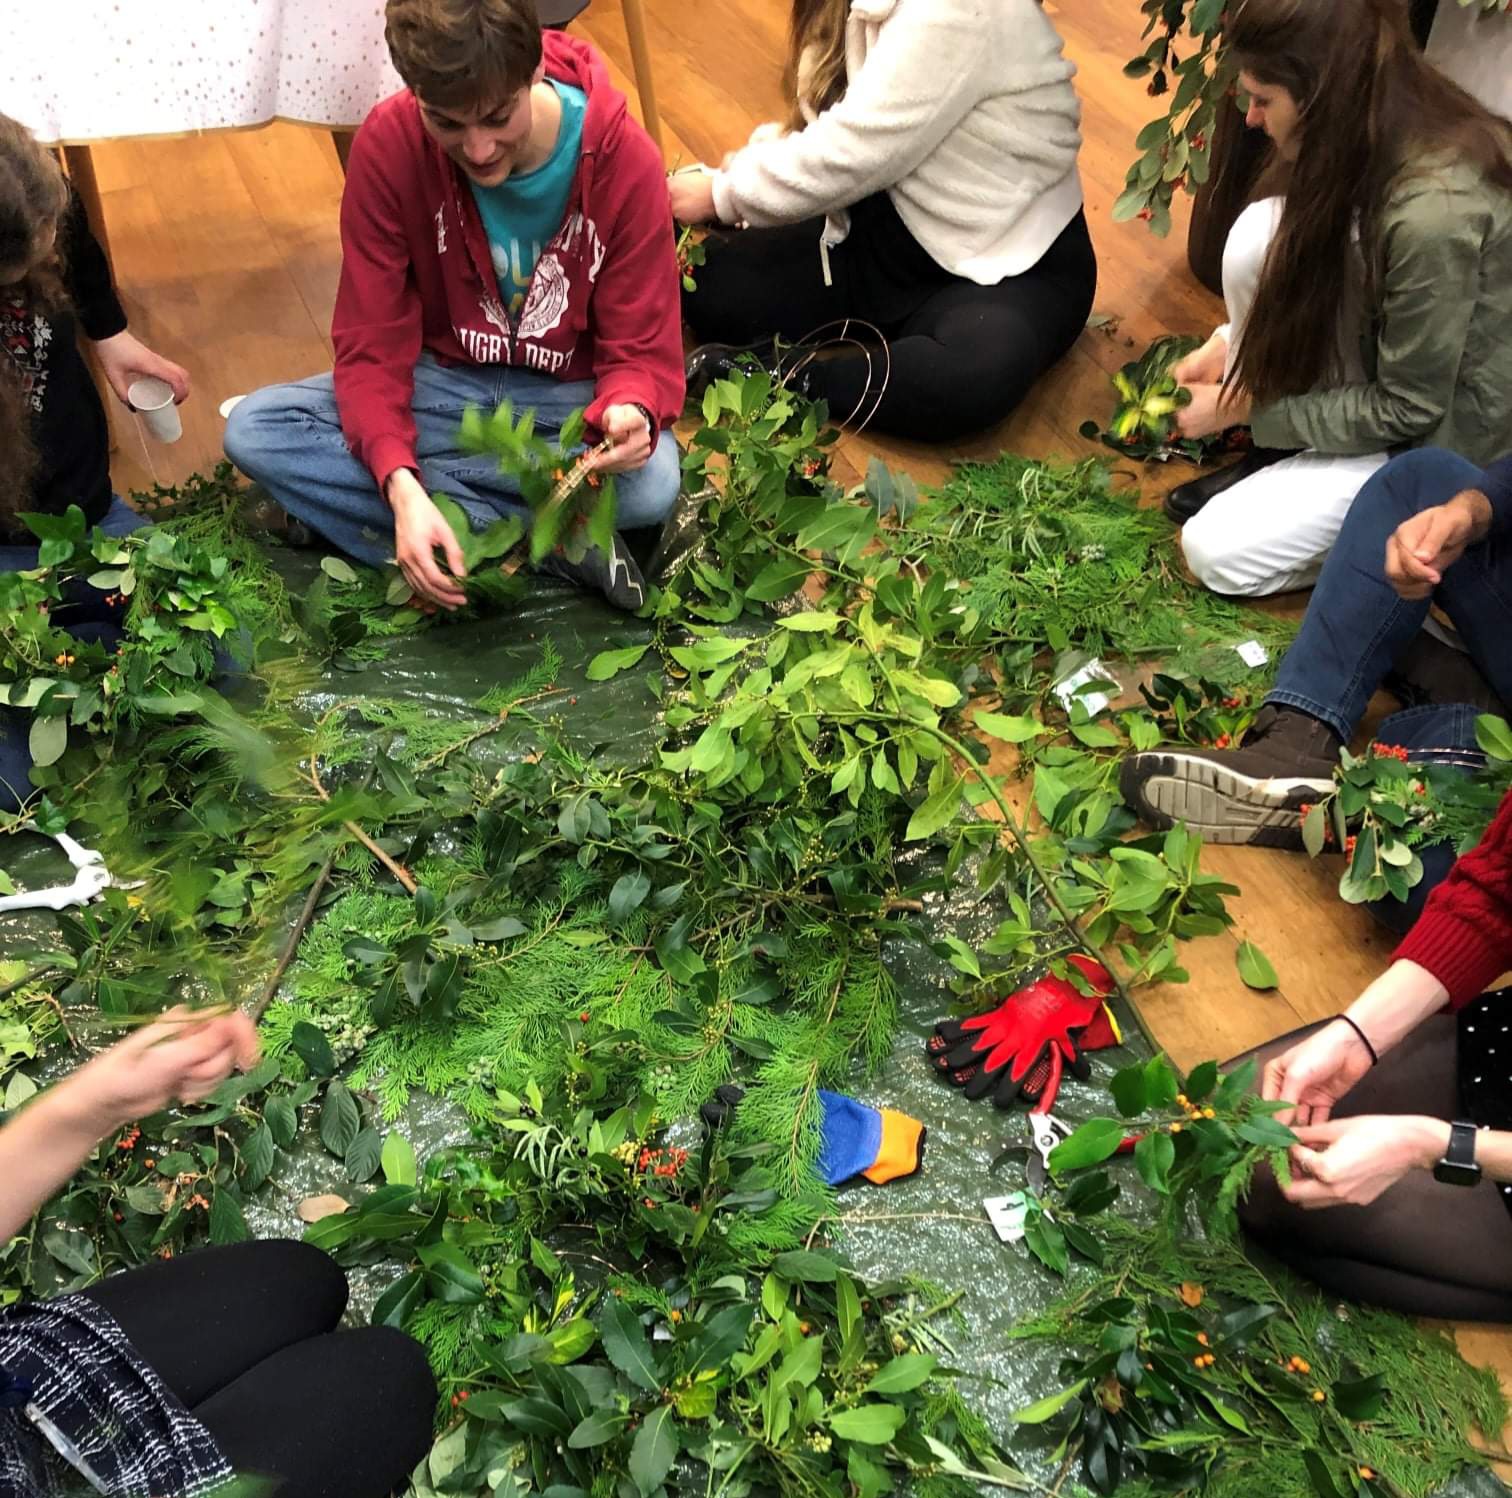 "Students making wreaths"